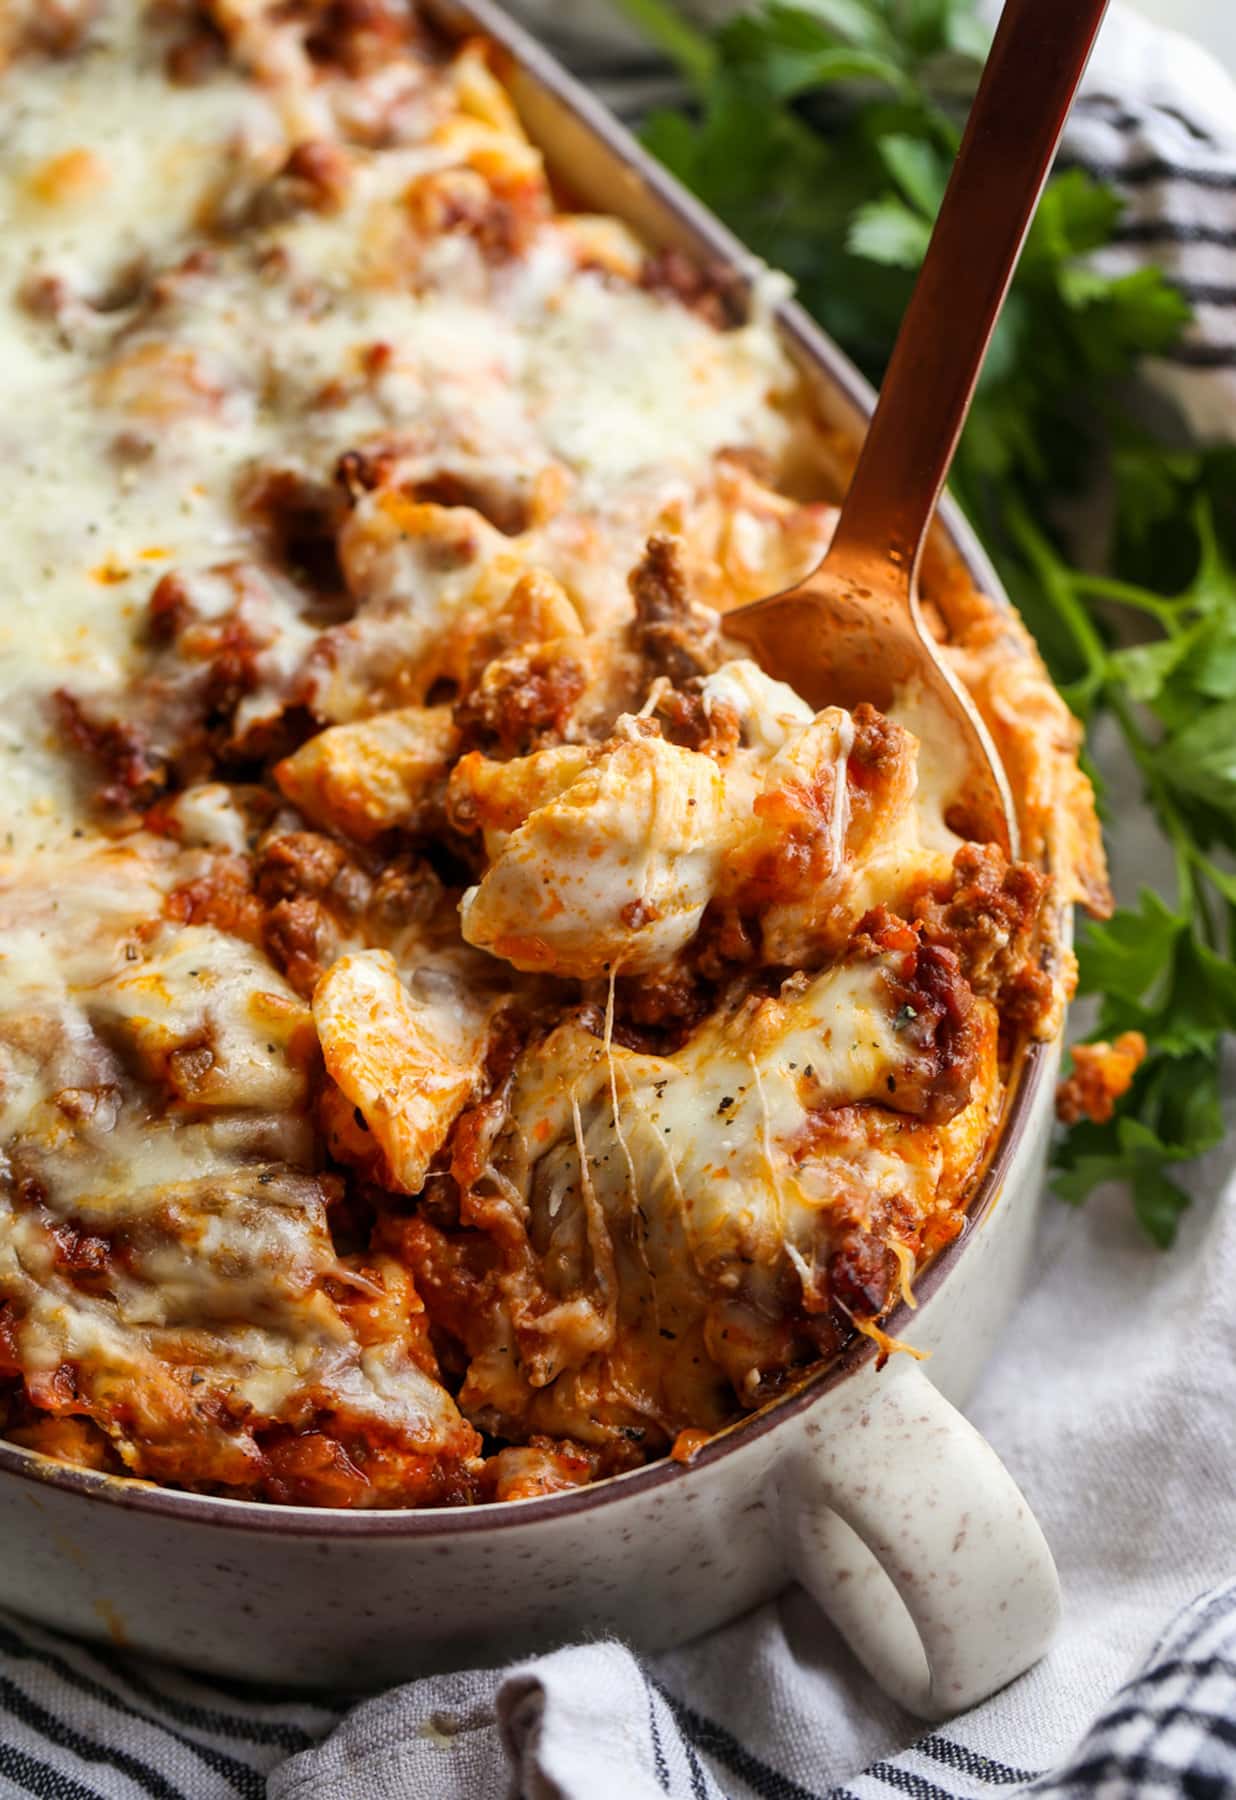 Unstuffed shells casserole with meat sauce, ricotta cheese, and marinara sauce topped with mozzarella being served with a spoon.